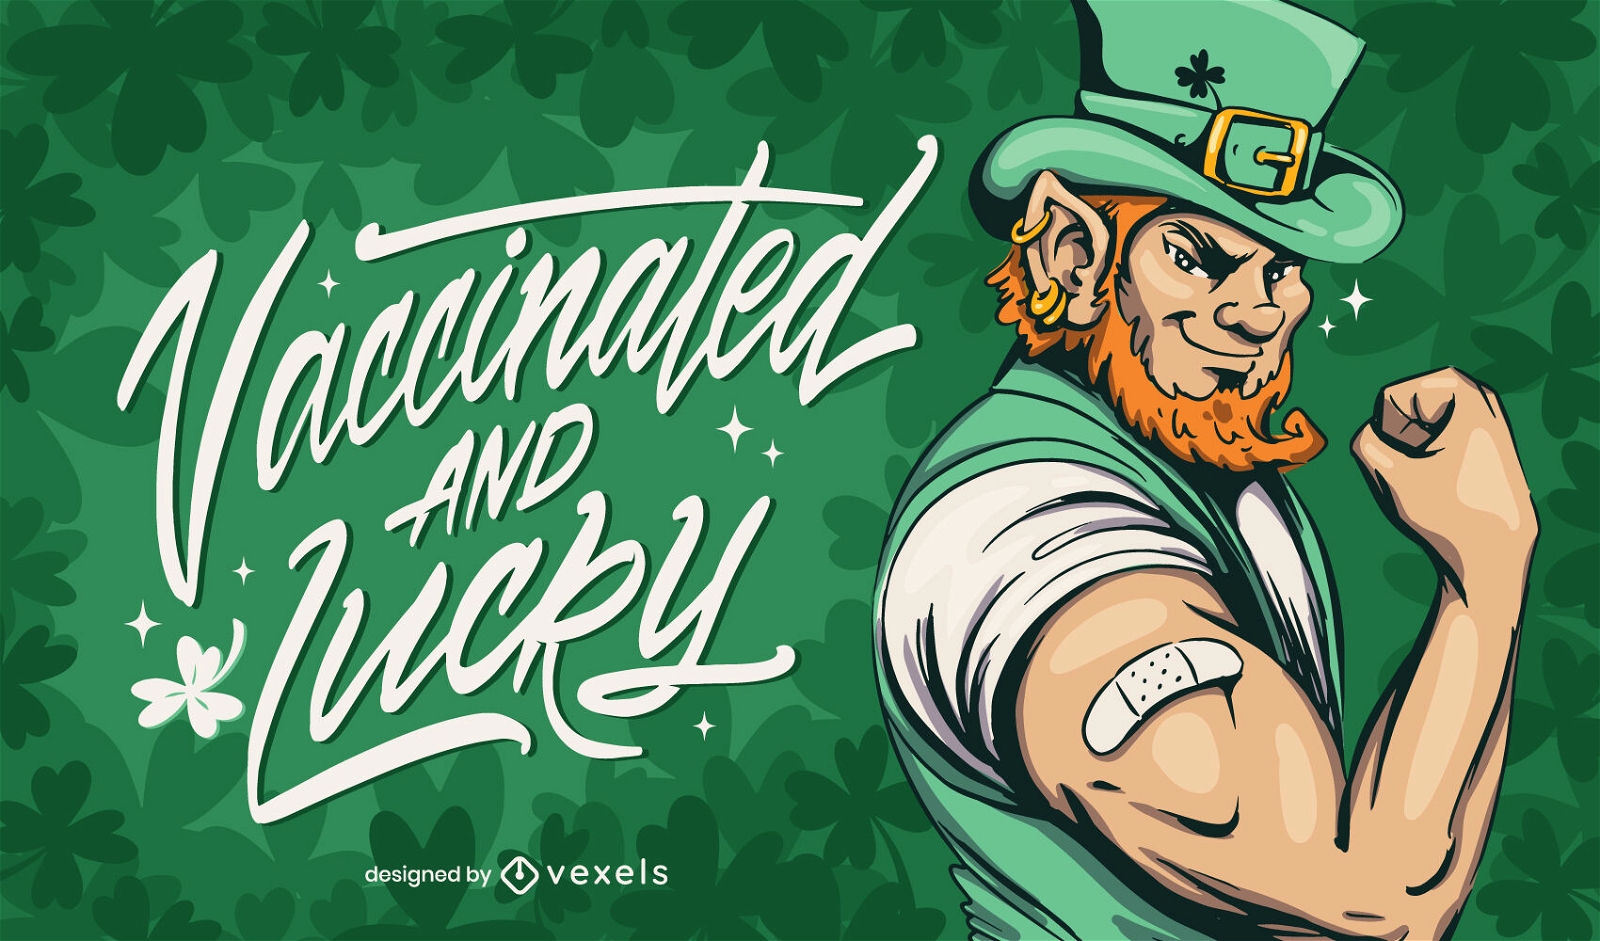 Vaccinated and lucky st. patrick's day illustration